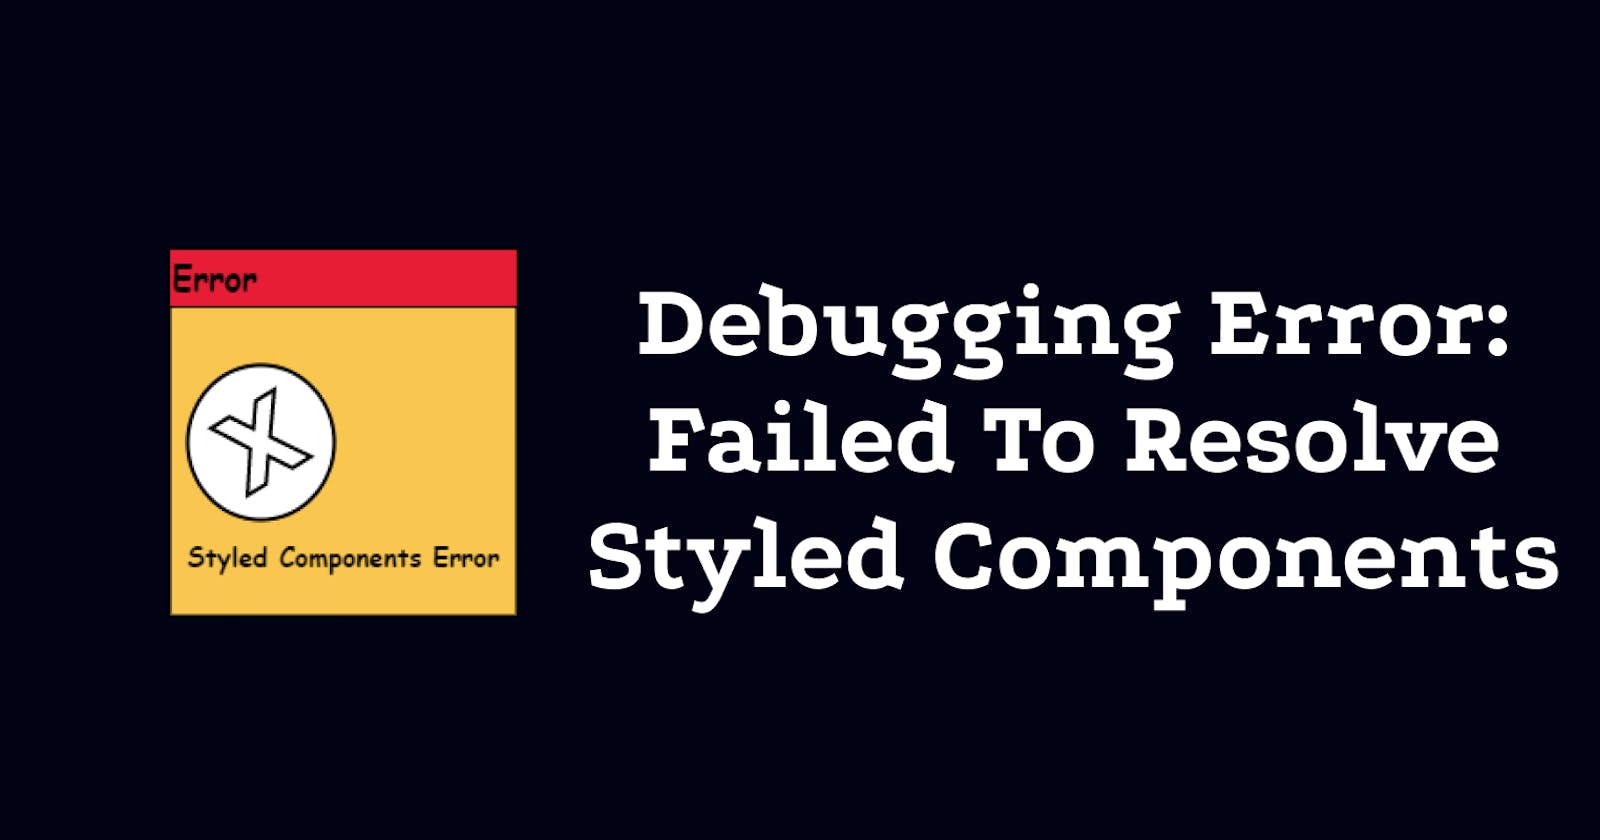 Debugging Error: Failed To Resolve Styled Component